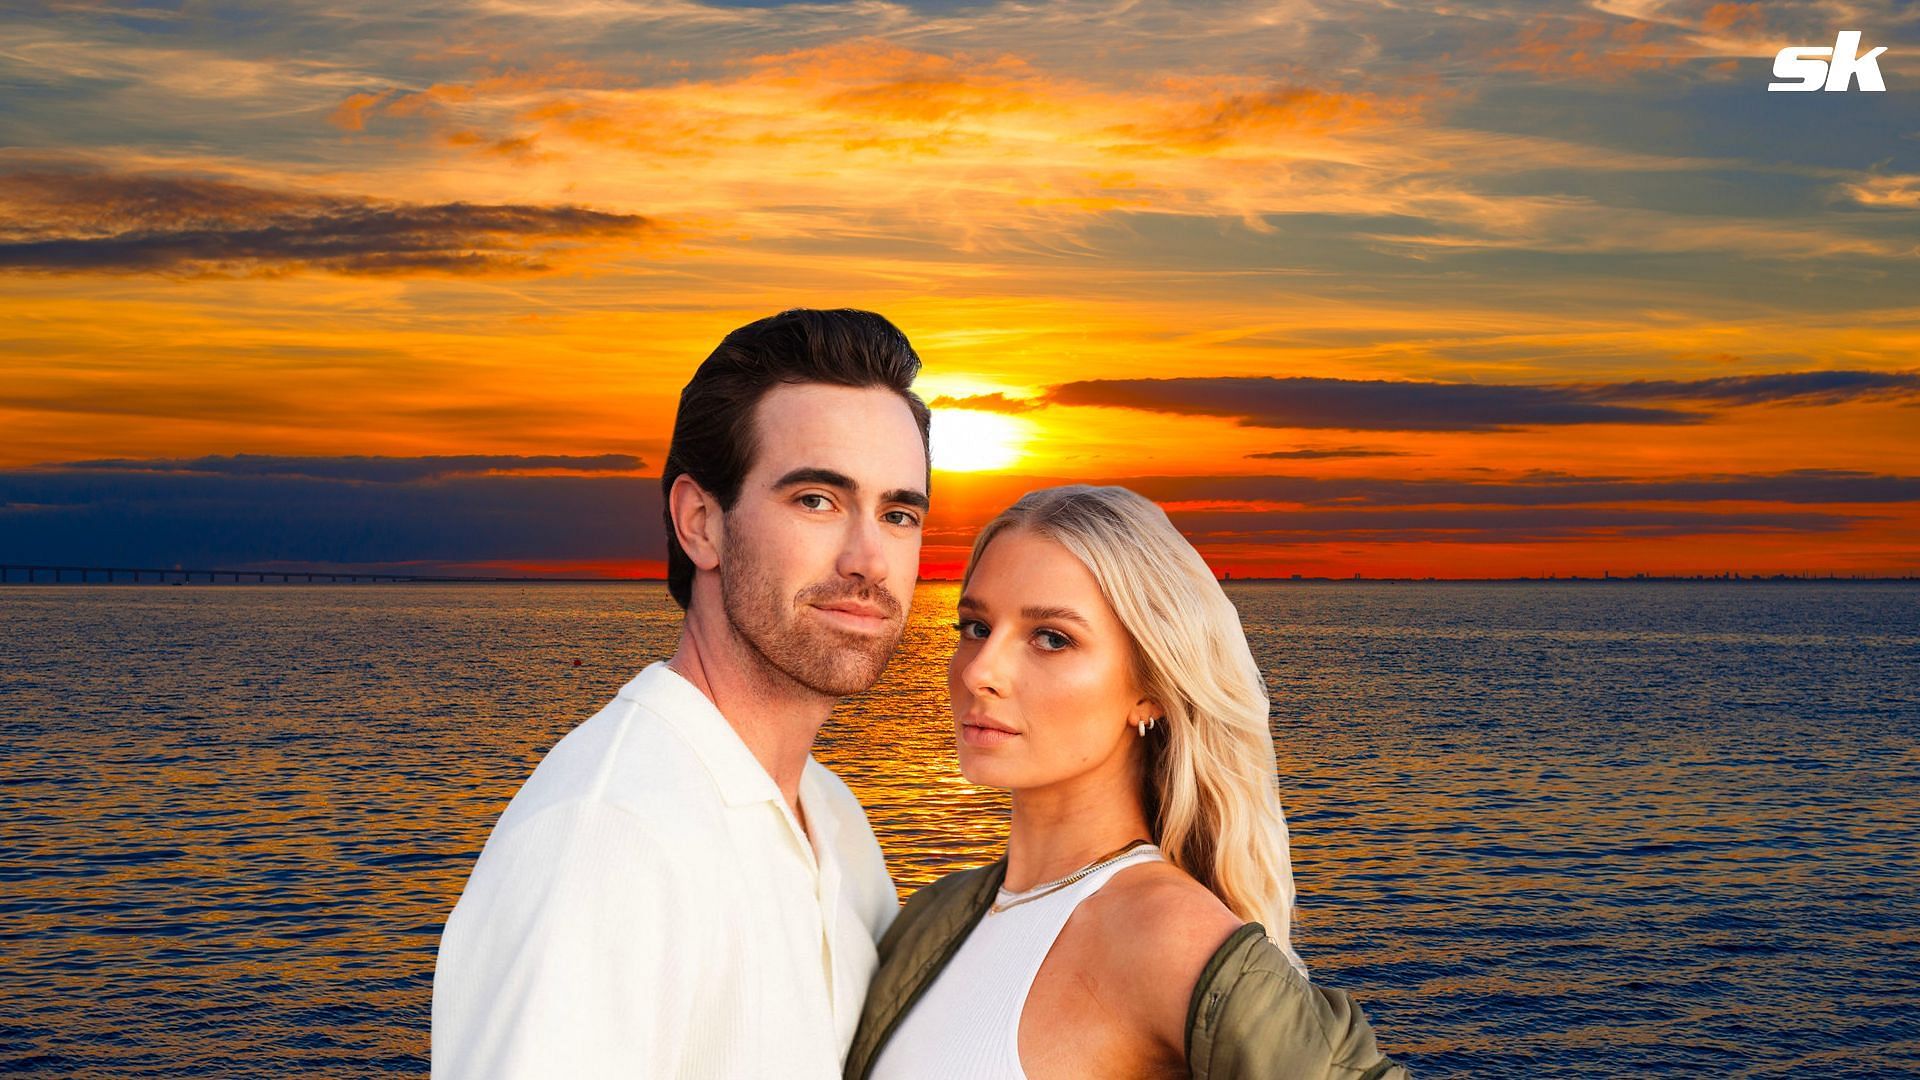 Fans enthusiastic as Shane Bieber models for wife Kara's clothing line